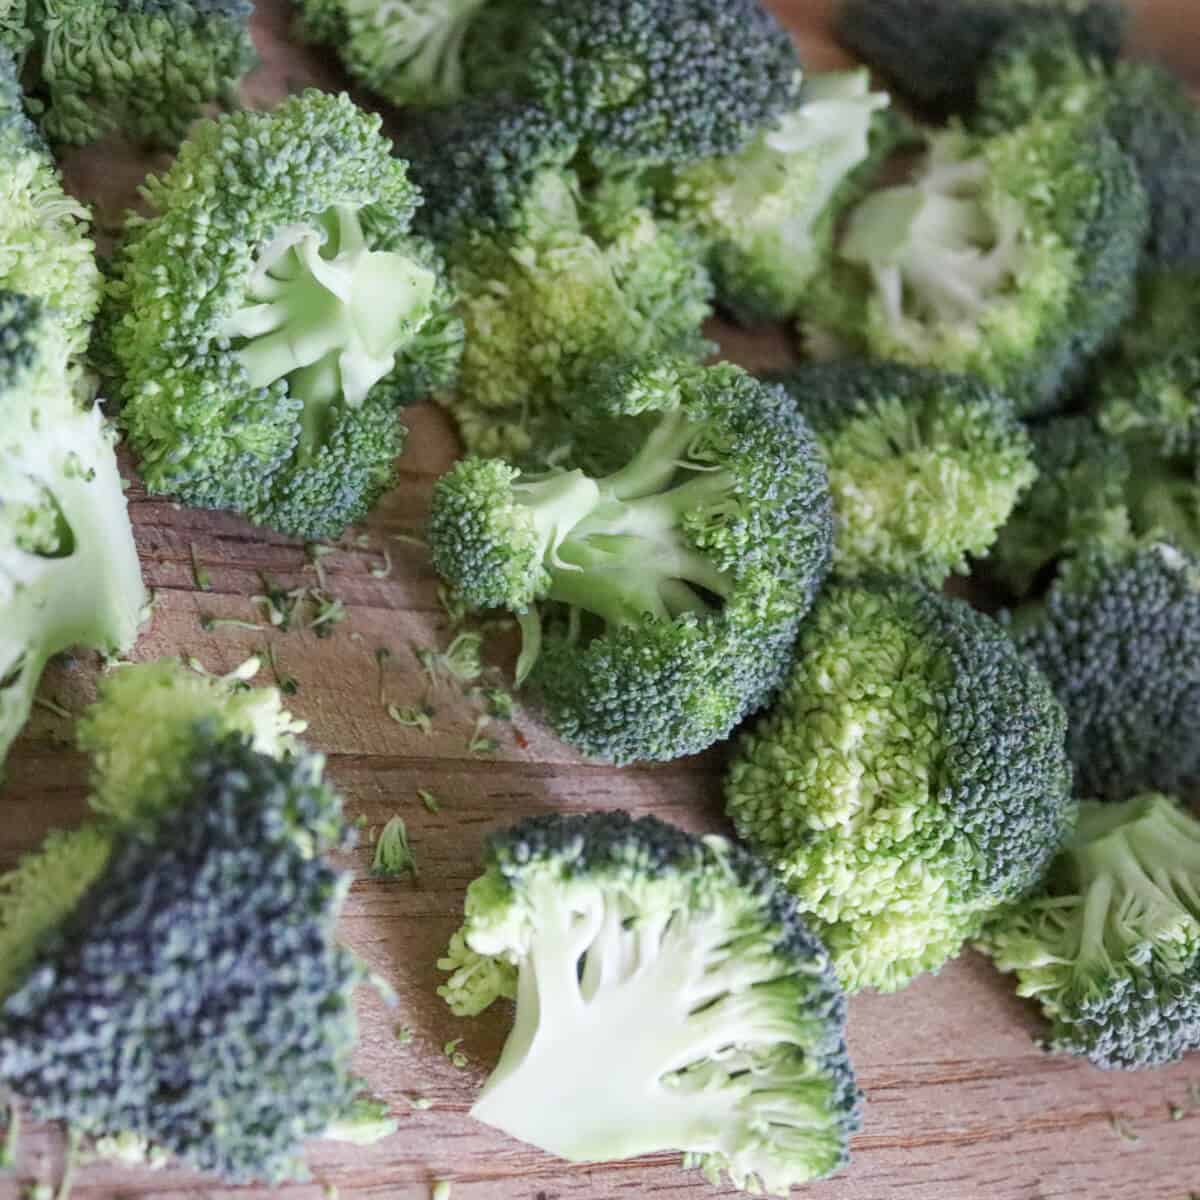 raw broccoli florets with the stalks trimmed to a short length on a wooden chopping board